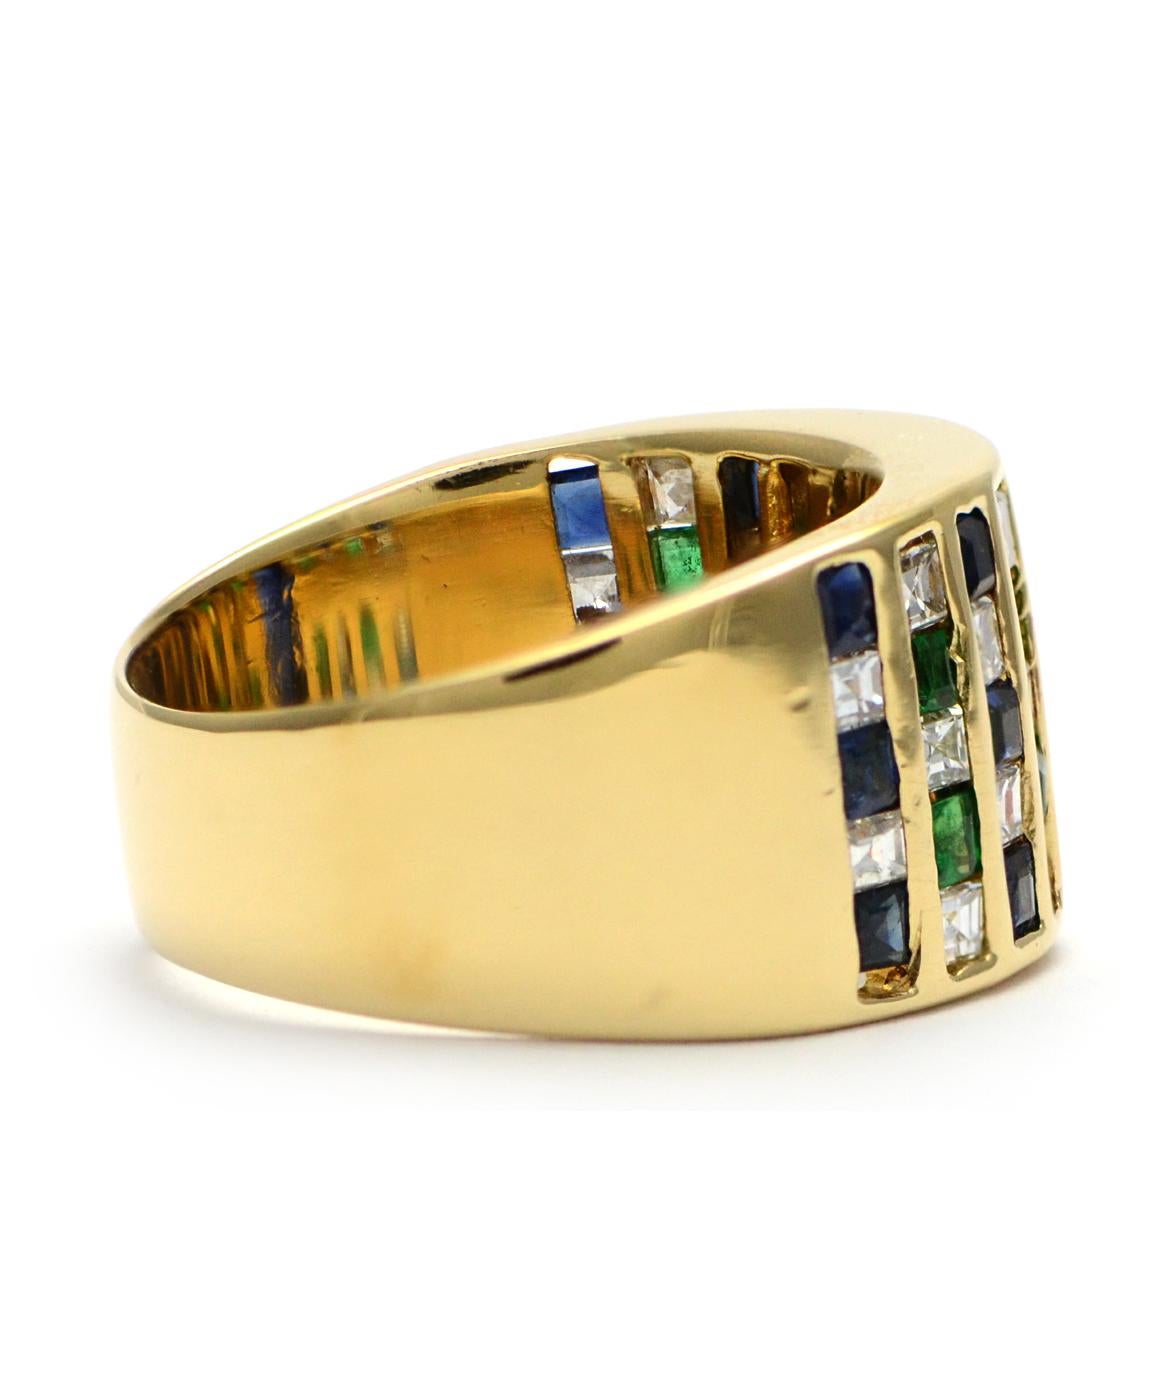 Excellent condition! This solid 14k yellow gold ring features a center genuine sapphire that is cut cornered rectangular shape measuring approximately 8.25mm X 4.85mm. There are a total of 12 square genuine accent sapphires, 20 genuine square